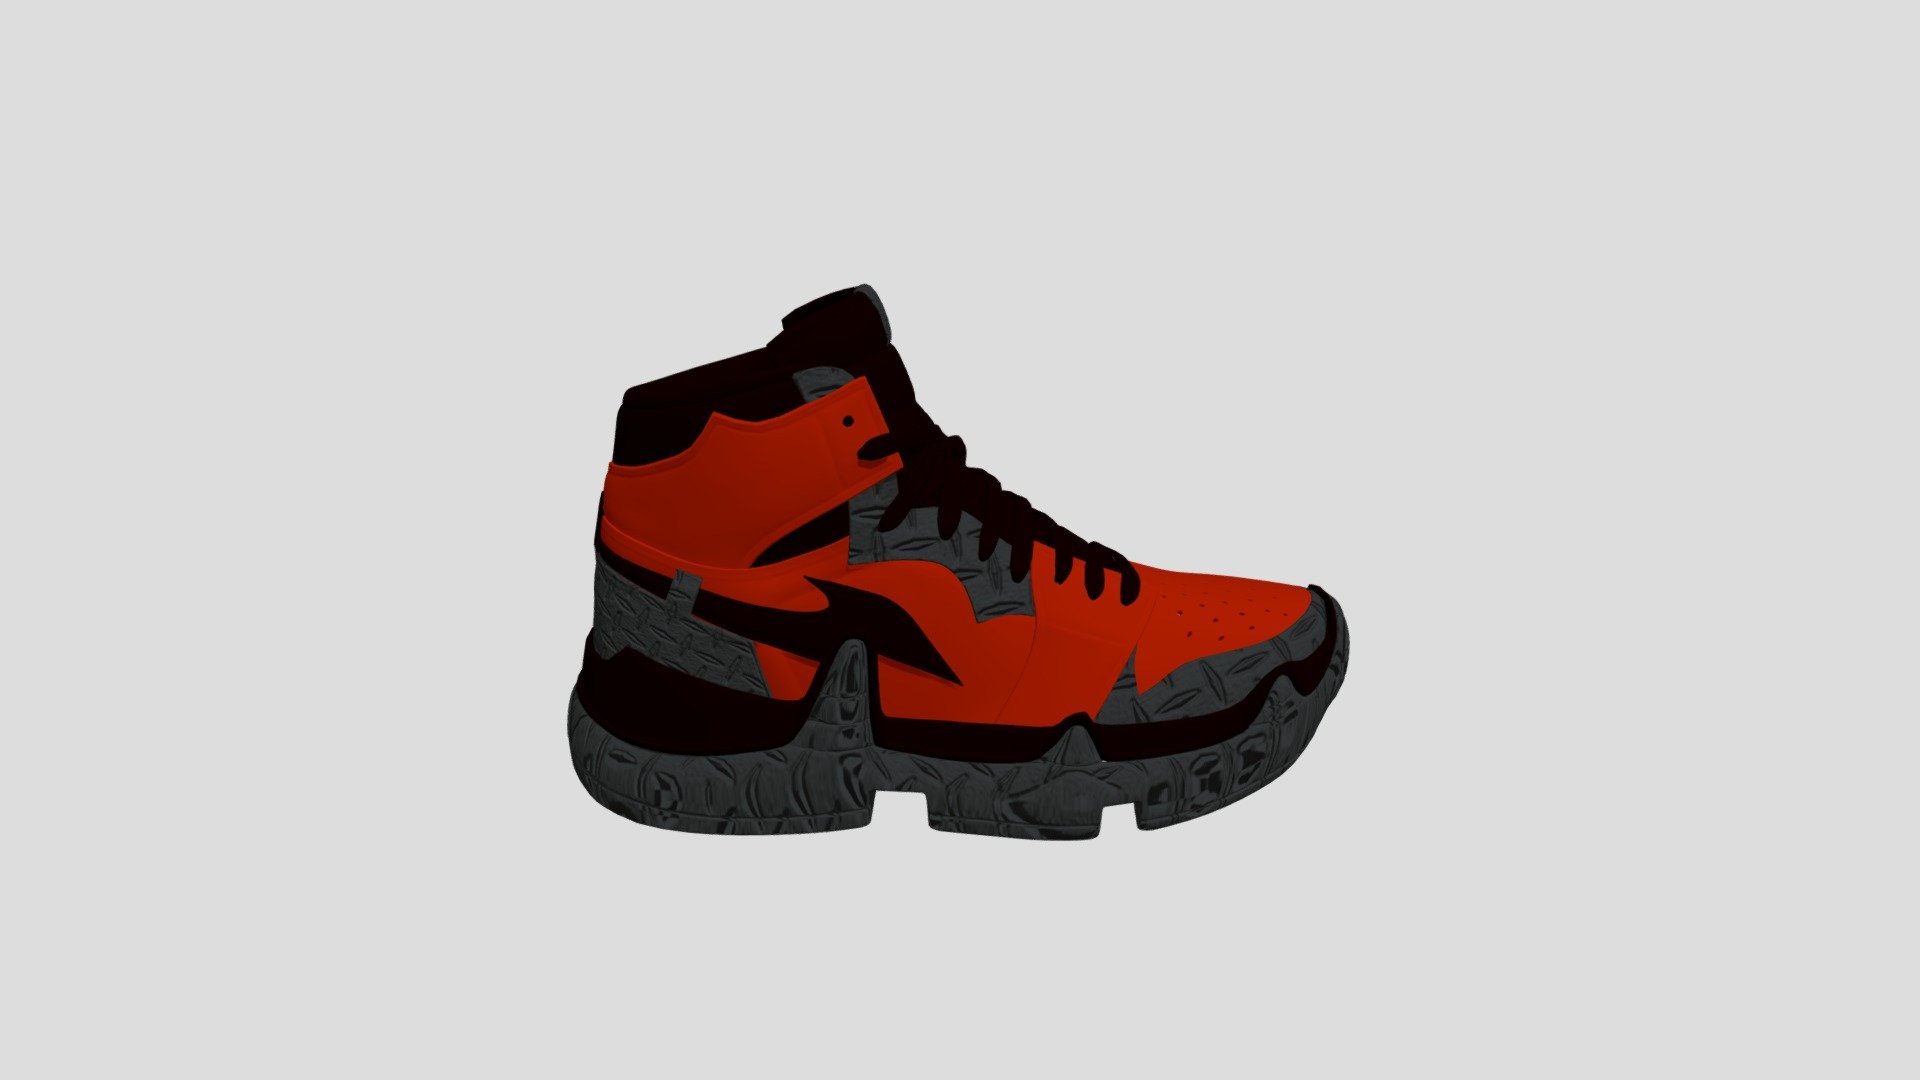 I received a email telling me I could actually design a pair of sneakers I would wear. I have never done any rendering or design work on shoes or clothing but I know what I like, so here's my take on a shoe I would buy if I seen it. Design with 3 colors Orange Nubuck Leather, Black Top Grain Leather, and Dark Gray diamond plate rubber. I would like to thank RTFKT Studios for getting my creative juices flowing.   https://sketchfab.com/rtfkt

Based on “RTFKT CREATOR ONE by RTFKT Studios, licensed under CC-Attribution 3d model